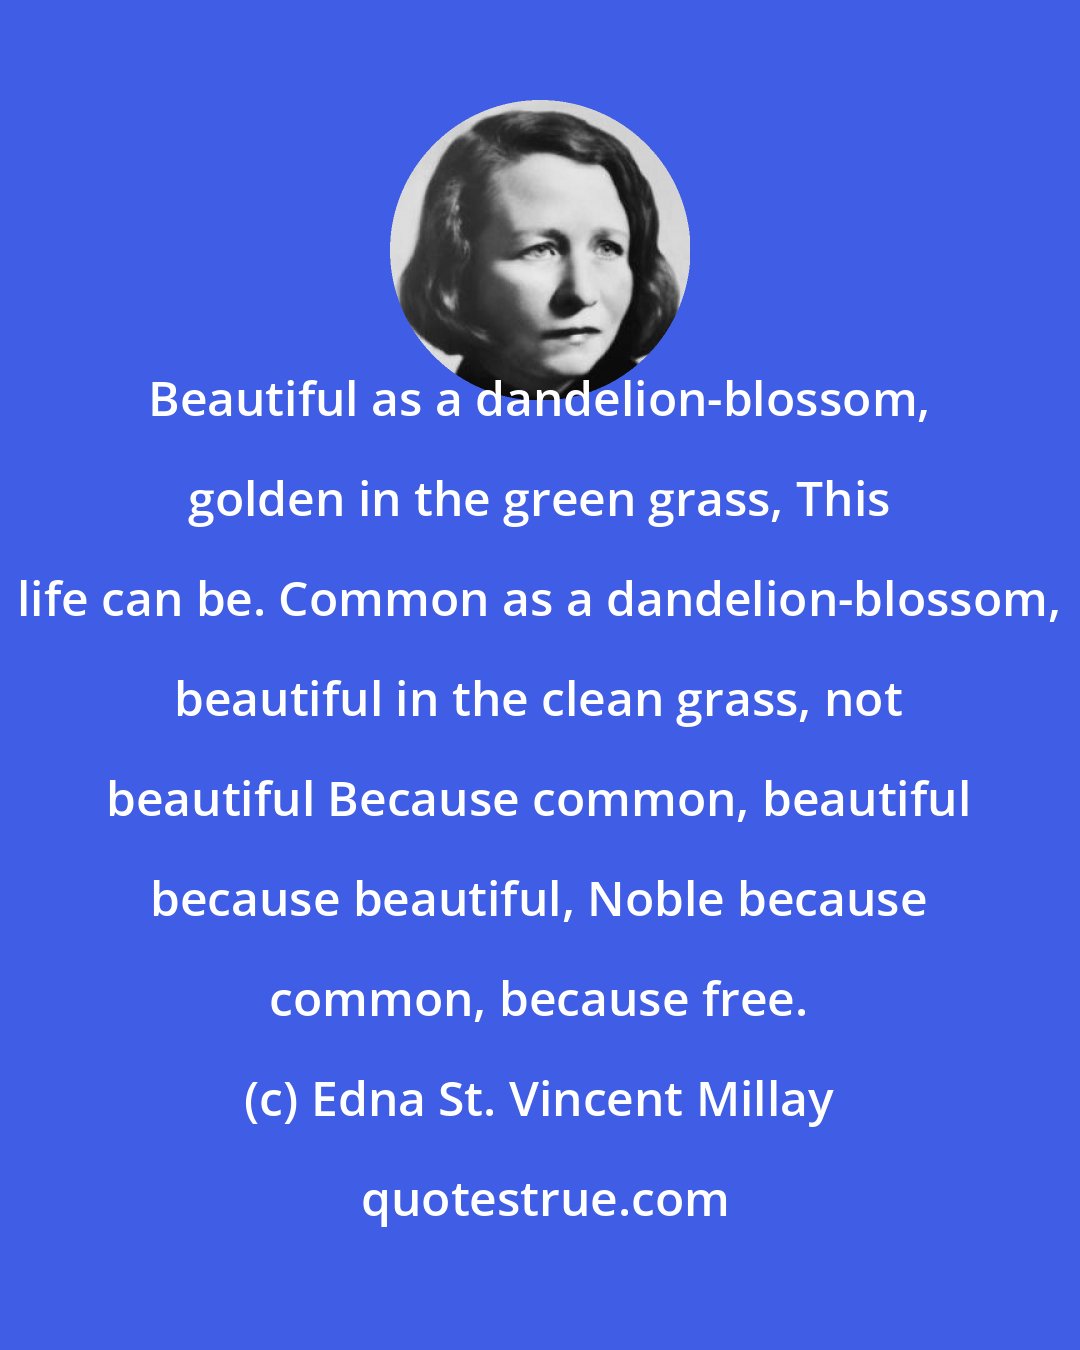 Edna St. Vincent Millay: Beautiful as a dandelion-blossom, golden in the green grass, This life can be. Common as a dandelion-blossom, beautiful in the clean grass, not beautiful Because common, beautiful because beautiful, Noble because common, because free.